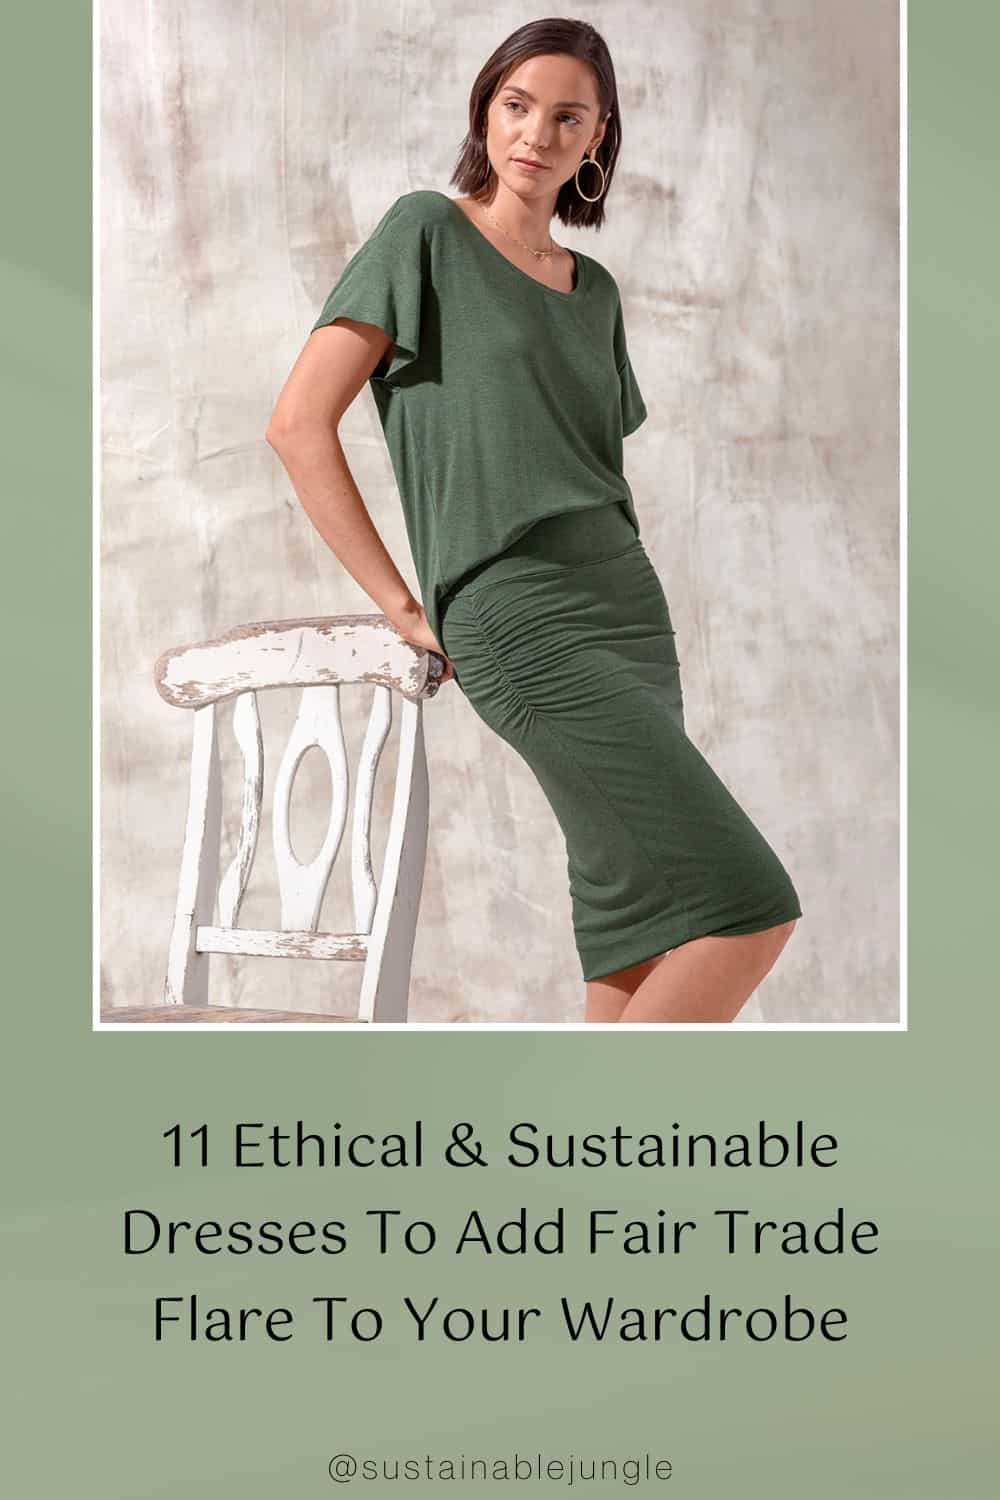 11 Ethical & Sustainable Dresses To Add Fair Trade Flare To Your Wardrobe Image by prAna #sustainabledresses #sustainablesummerdresses #ethicaldresses #sustainablefashiondresses #affordableethicaldresses #sustainableethicaldresses #sustainablejungle